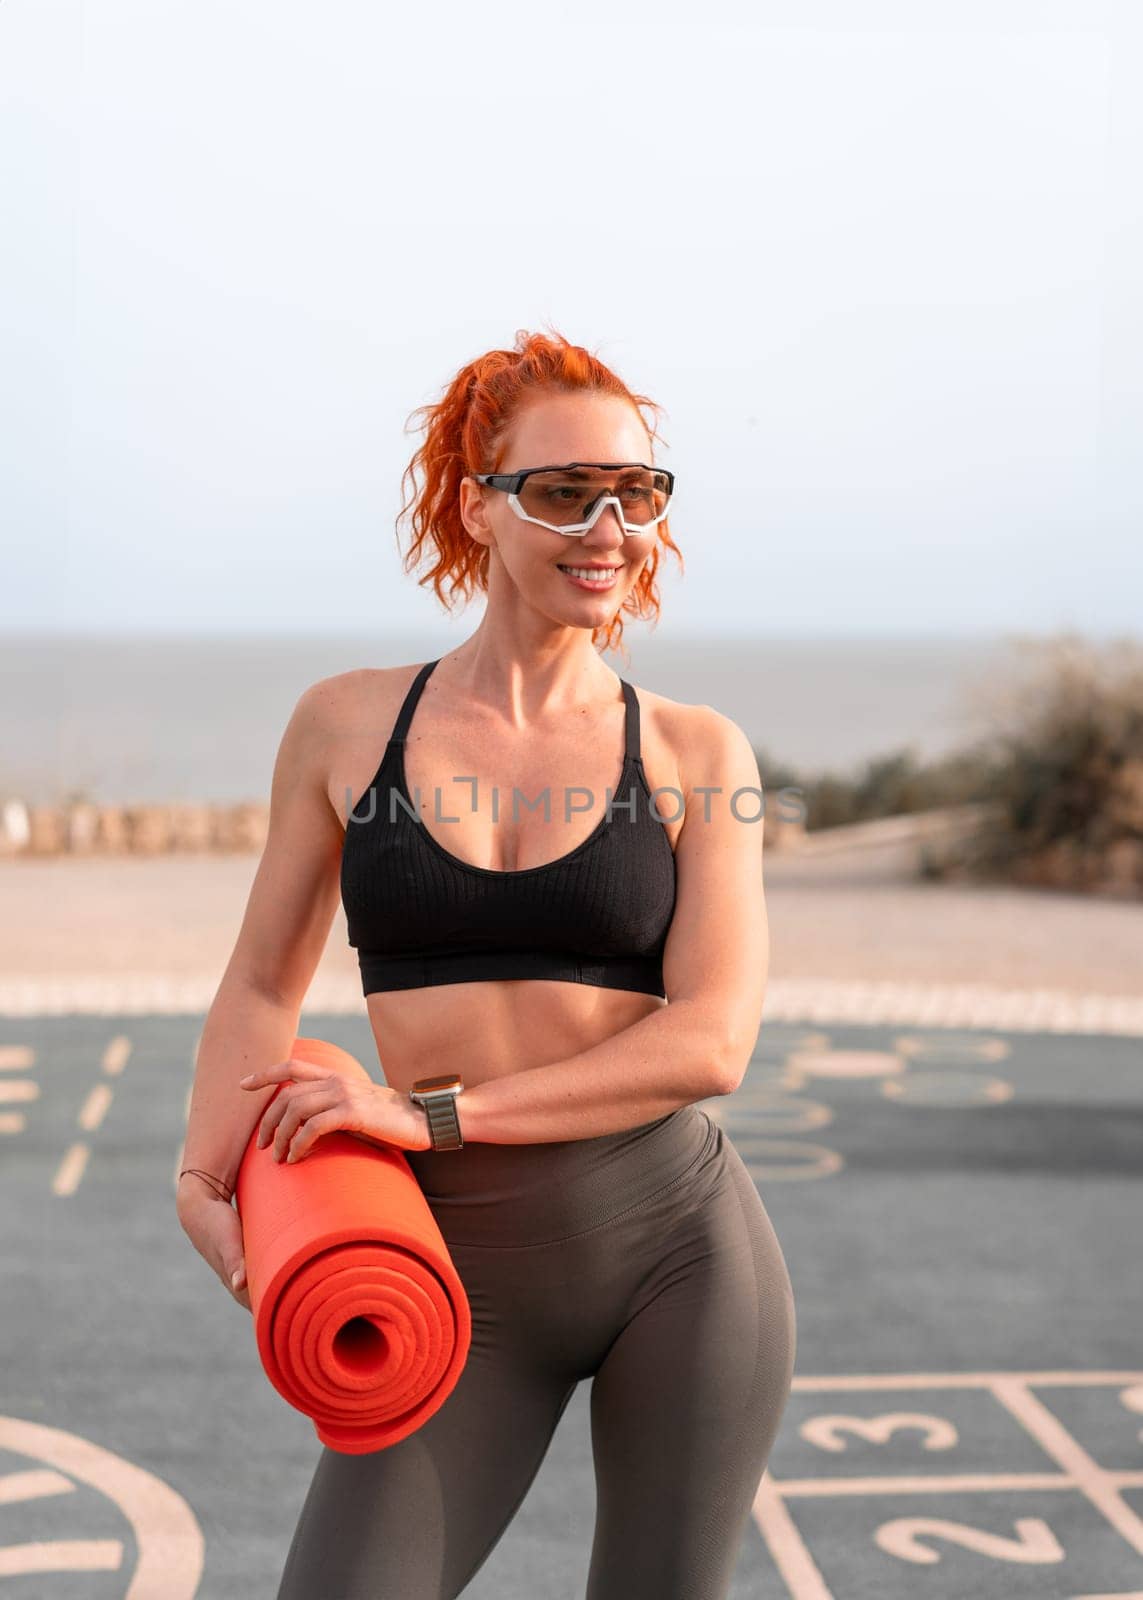 Smiling redhead woman in sunglasses holding rolled yoga mat and looking away. Fit sporty female athlete in activewear looking away at summer park. Fitness and health concept.